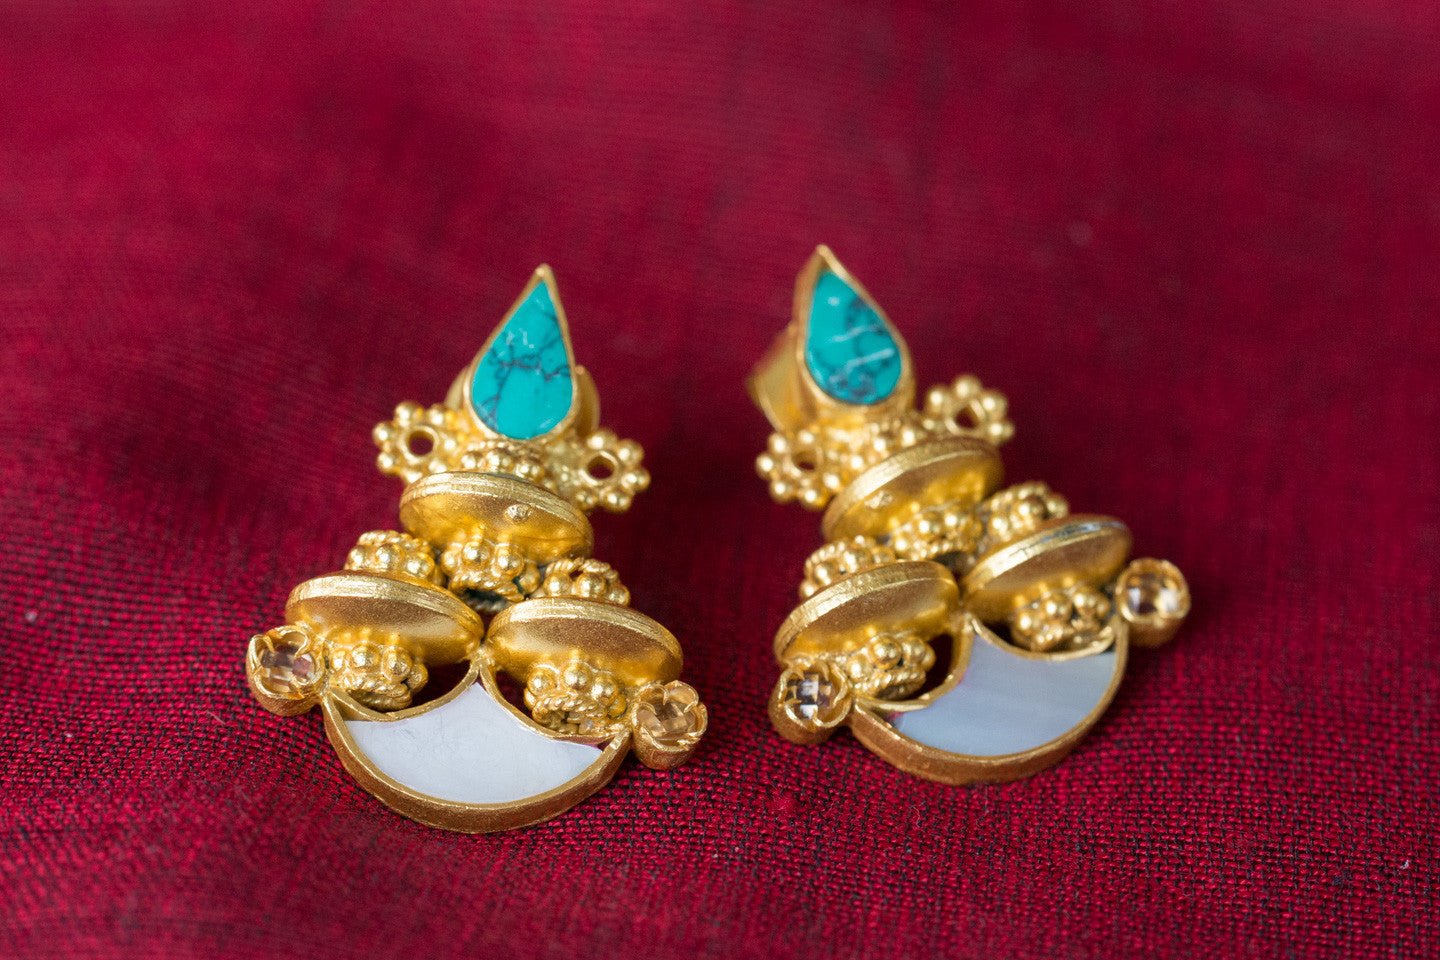 20a433-silver-gold-amrapali-earrings-turquoise-glass